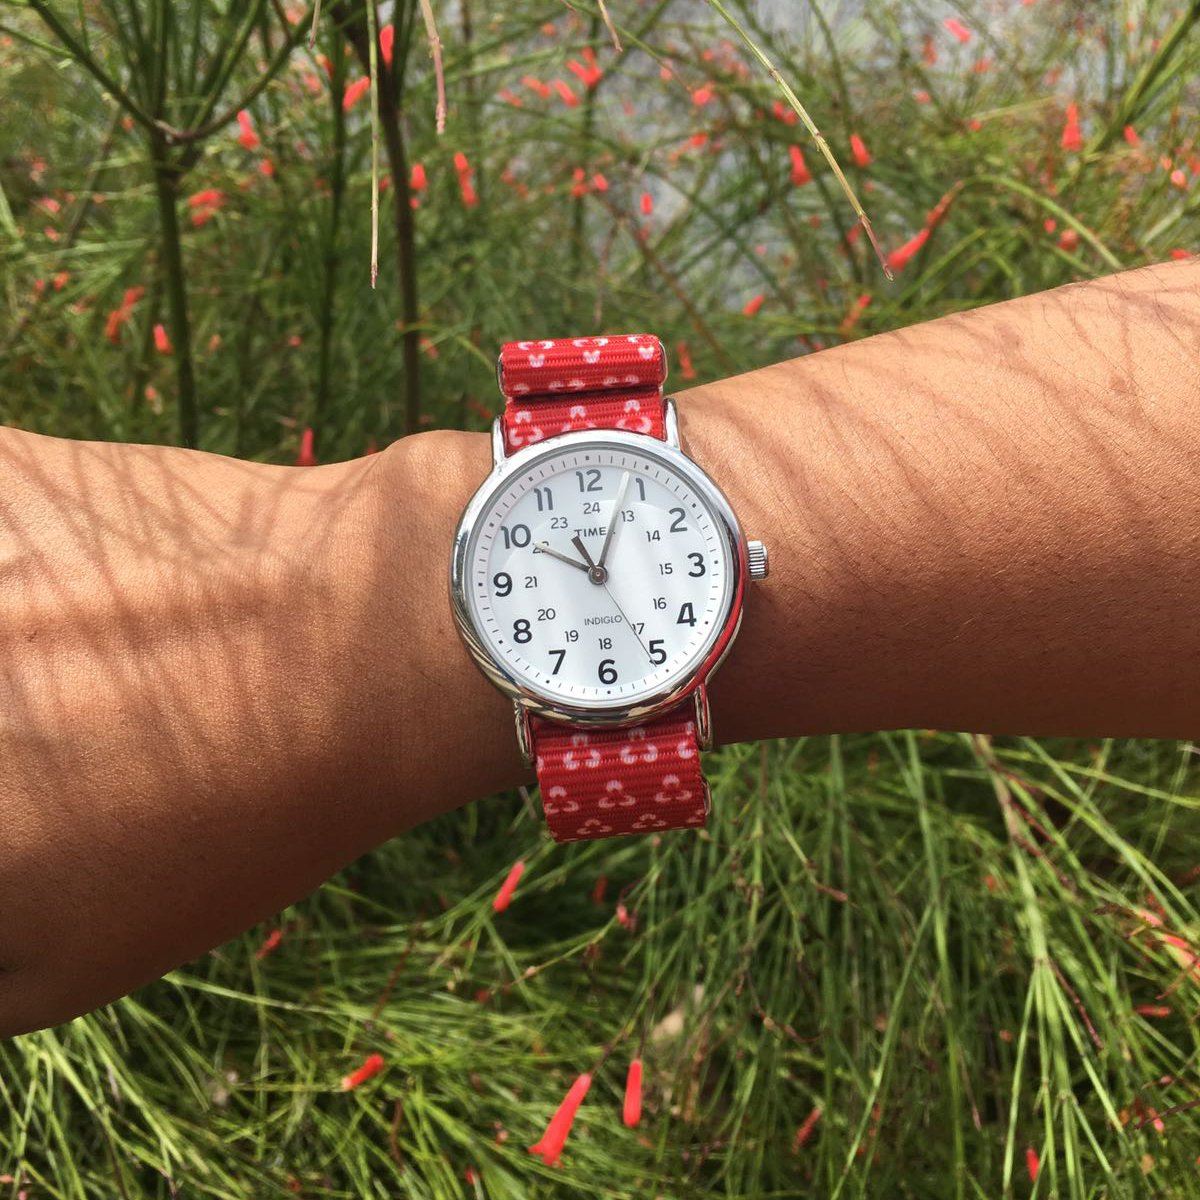 Starting the weekend with Timex Weekender on Vario graphic